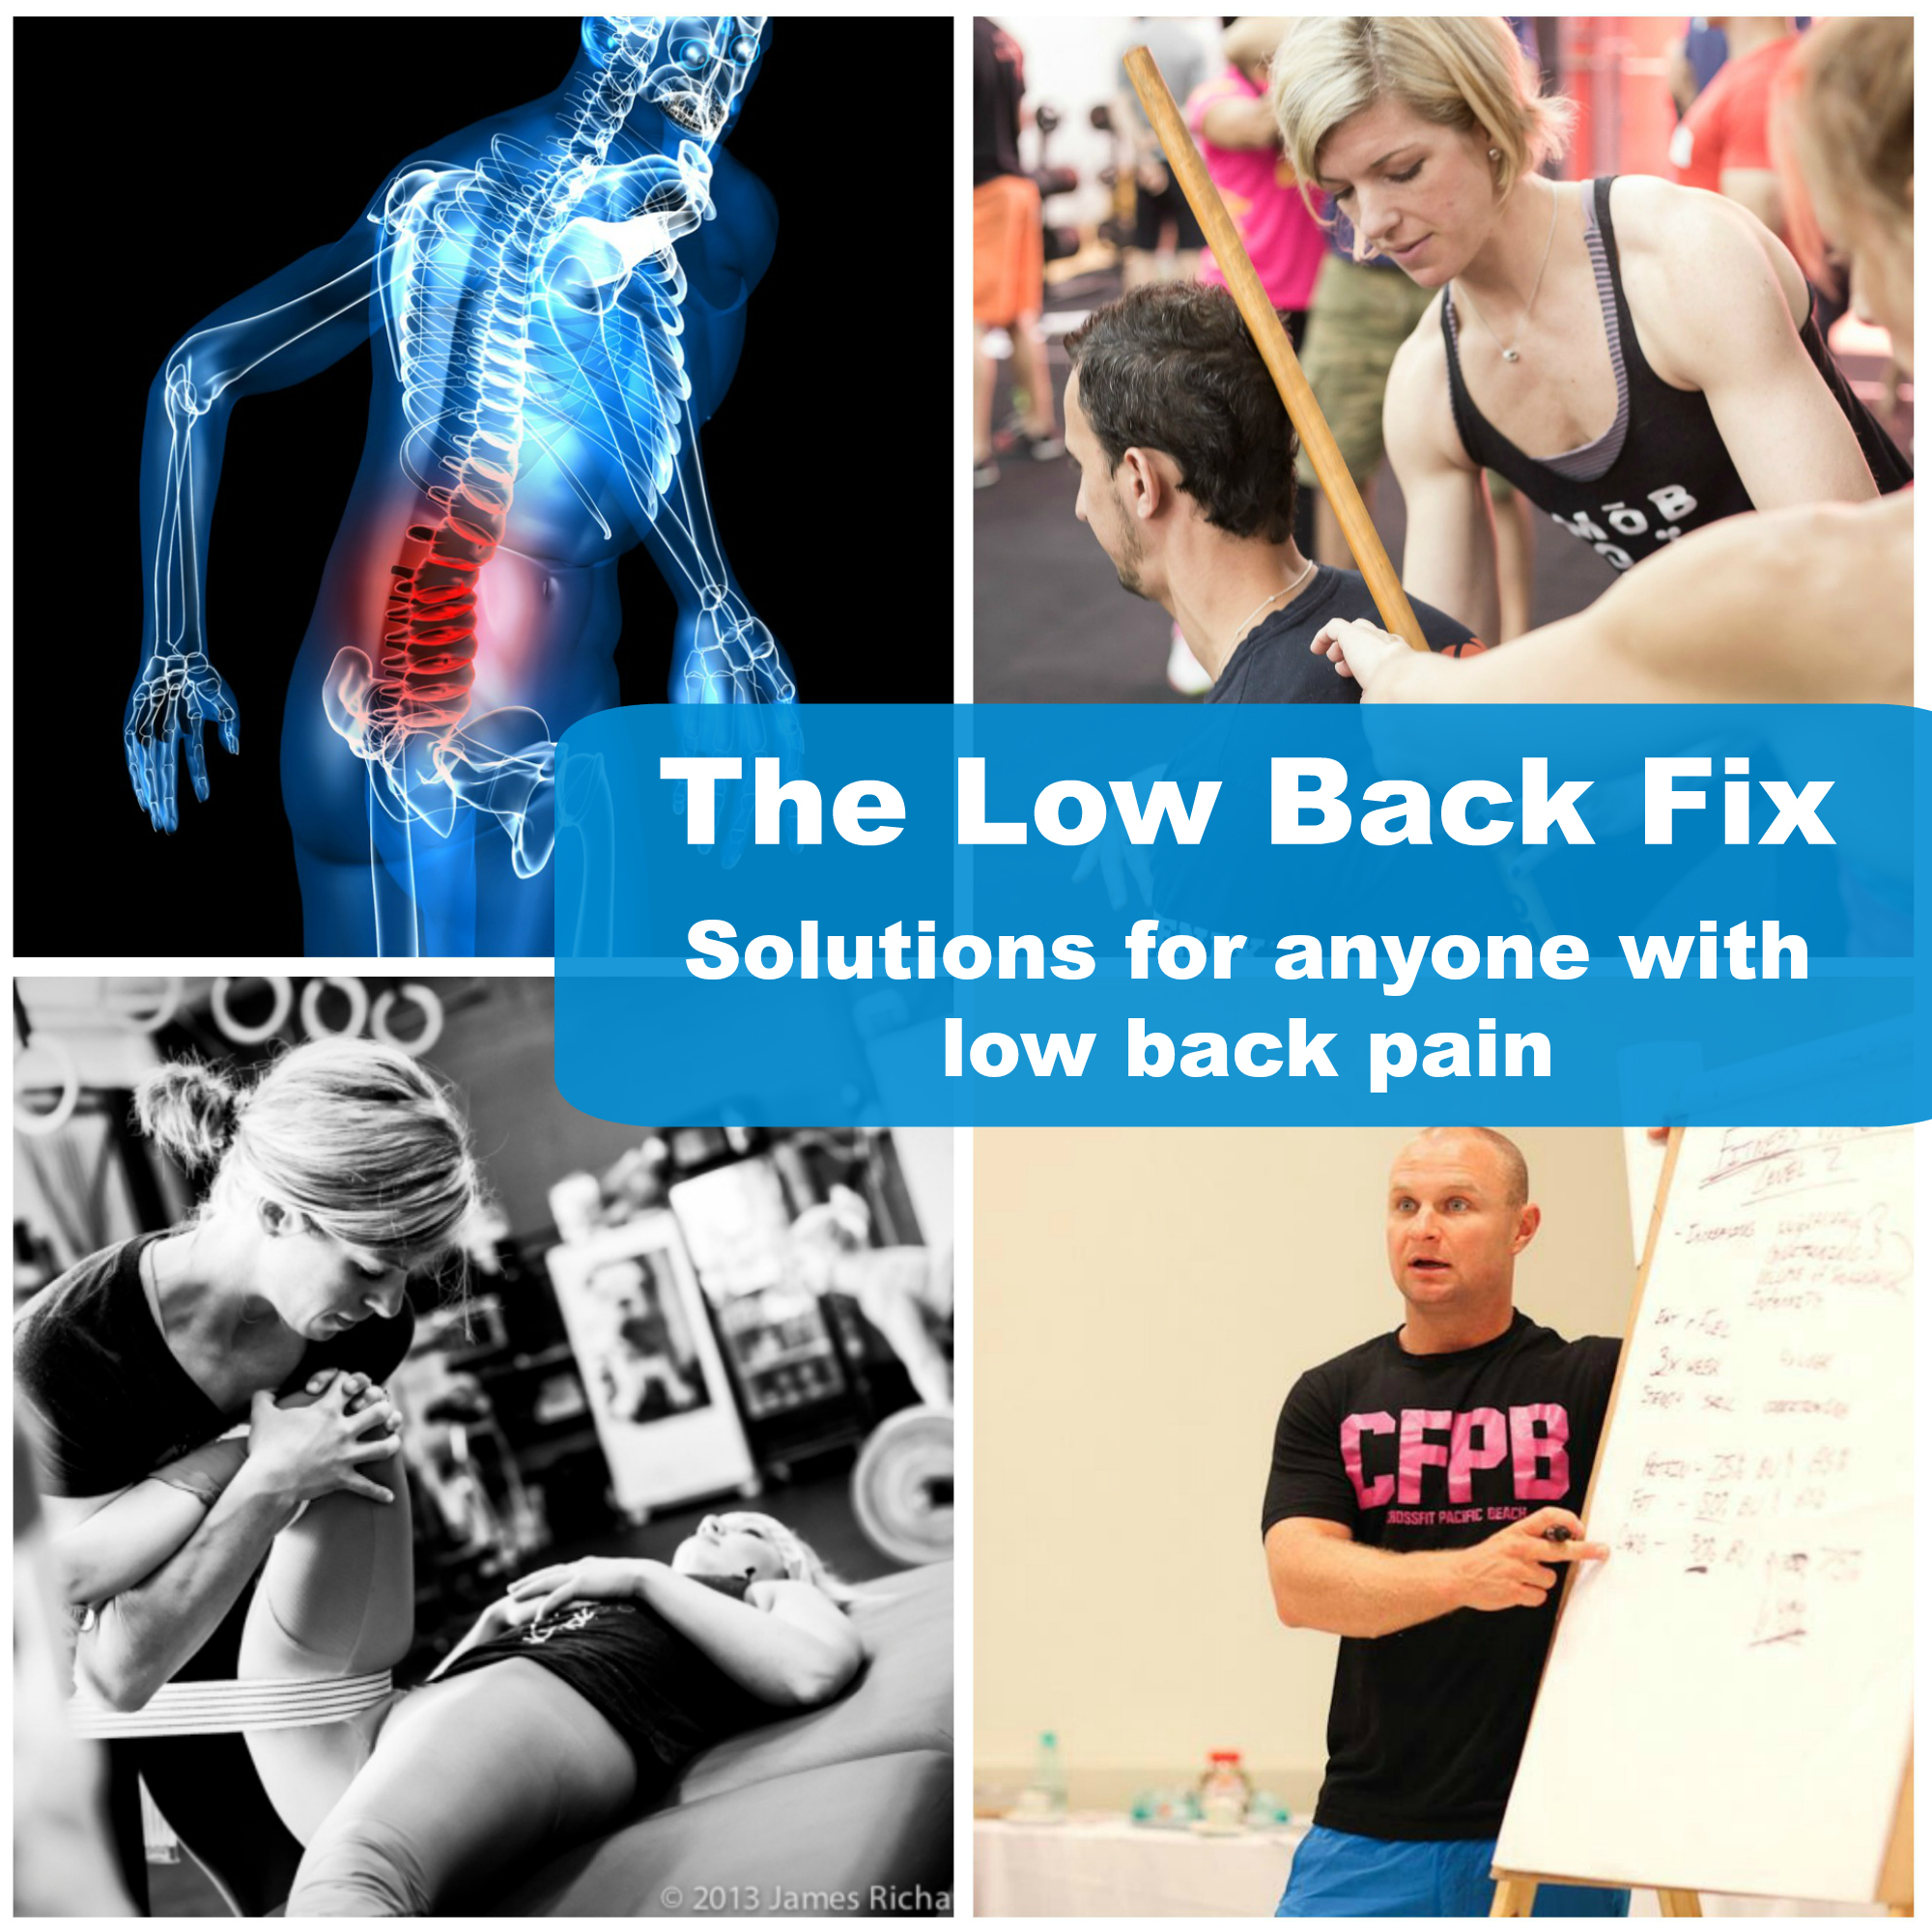 about low back fix